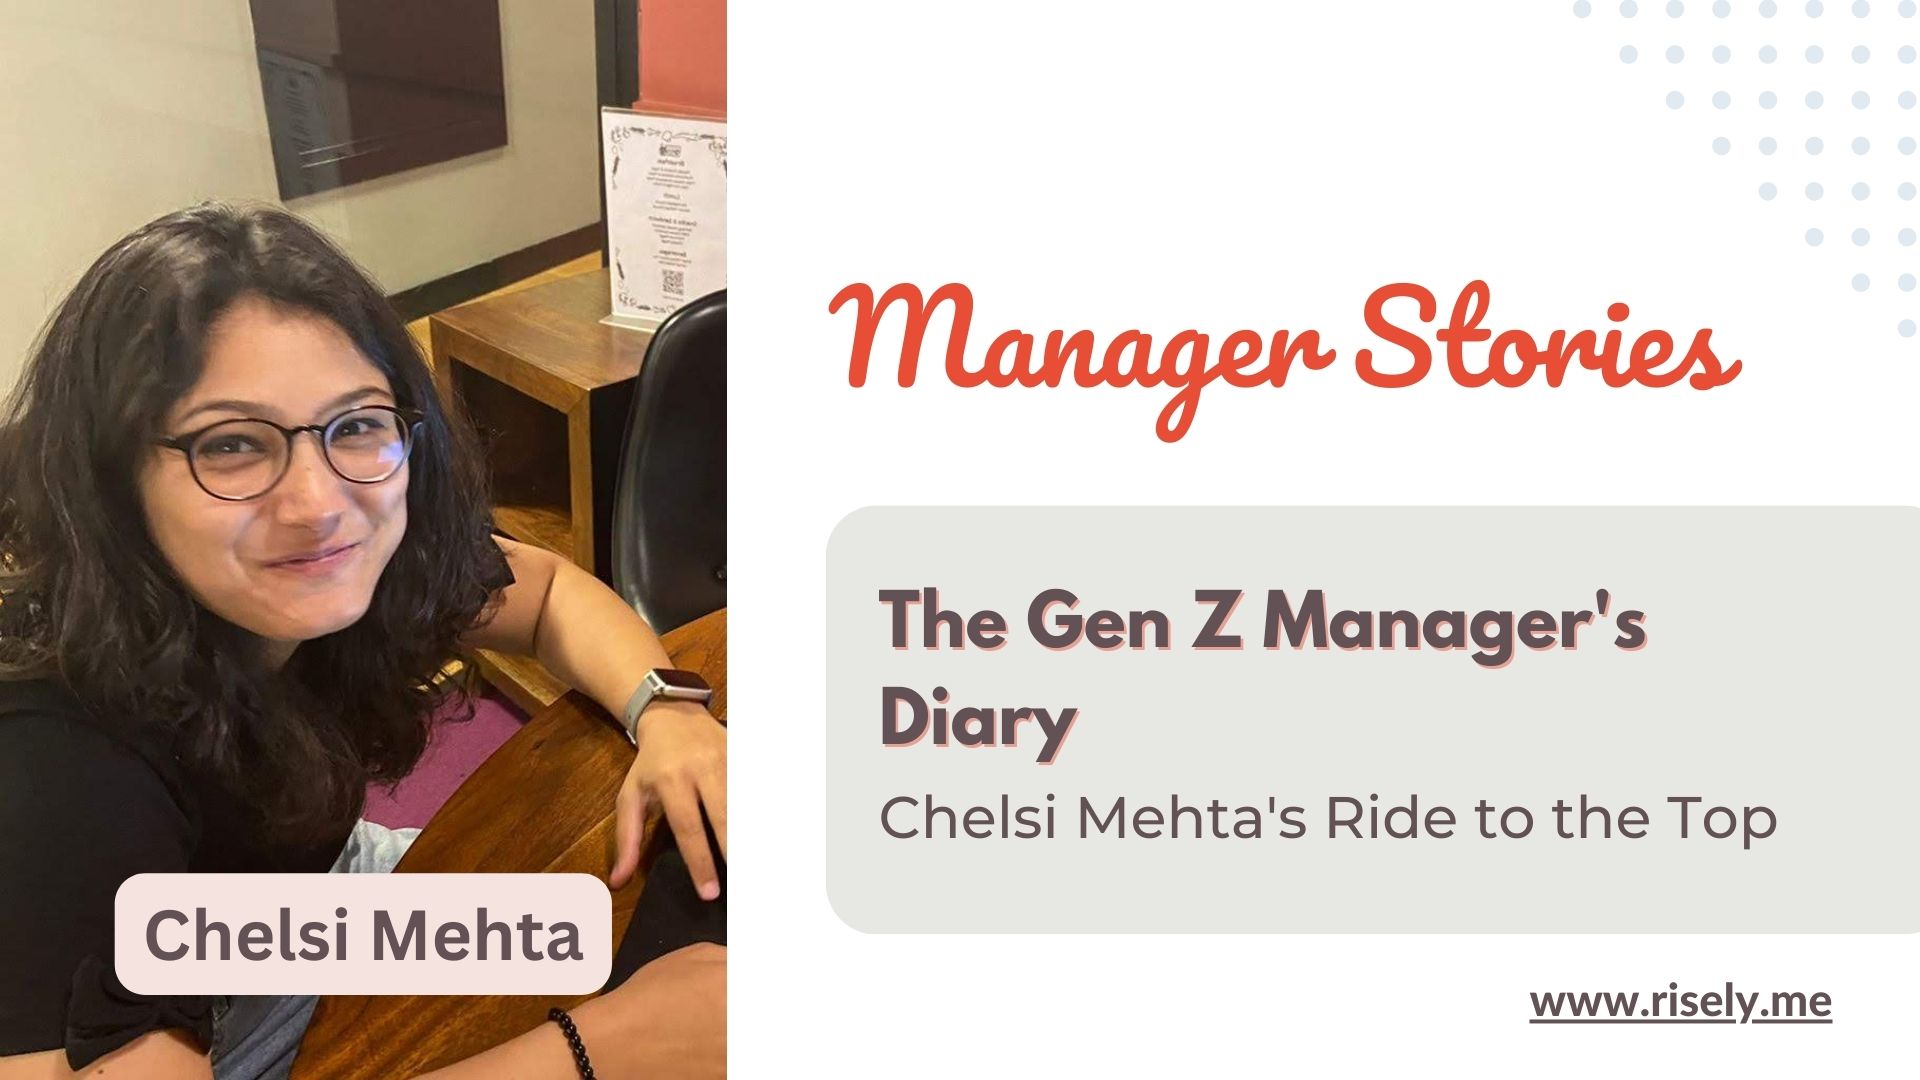 The Gen Z Manager’s Diary: Chelsi Mehta’s Ride to the Top